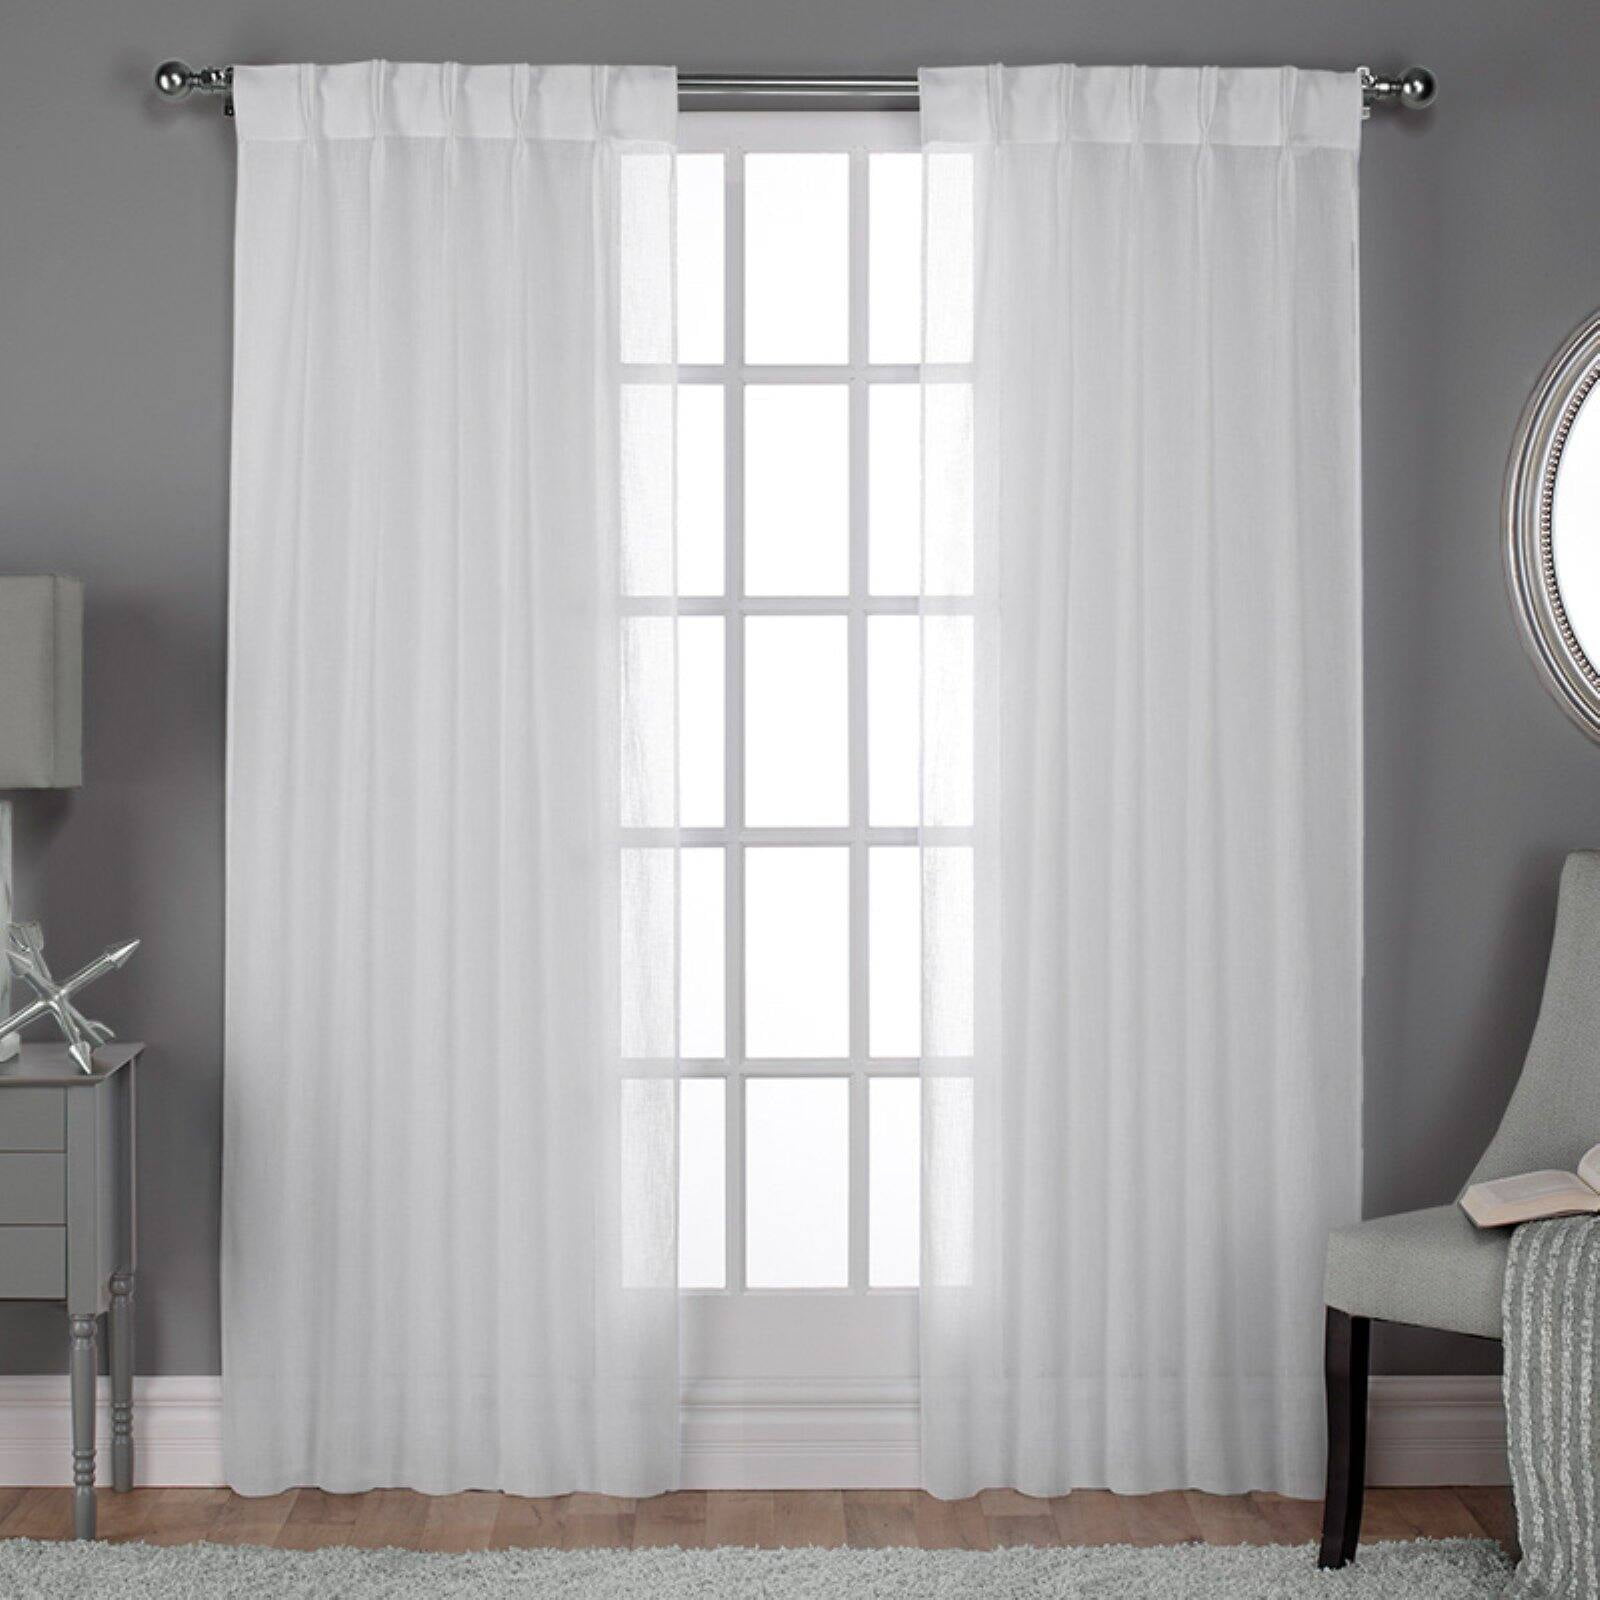 2 of 72"W x 84"L Stylemaster® Splendor Pinch Pleated Drapes Pair Ivory White 